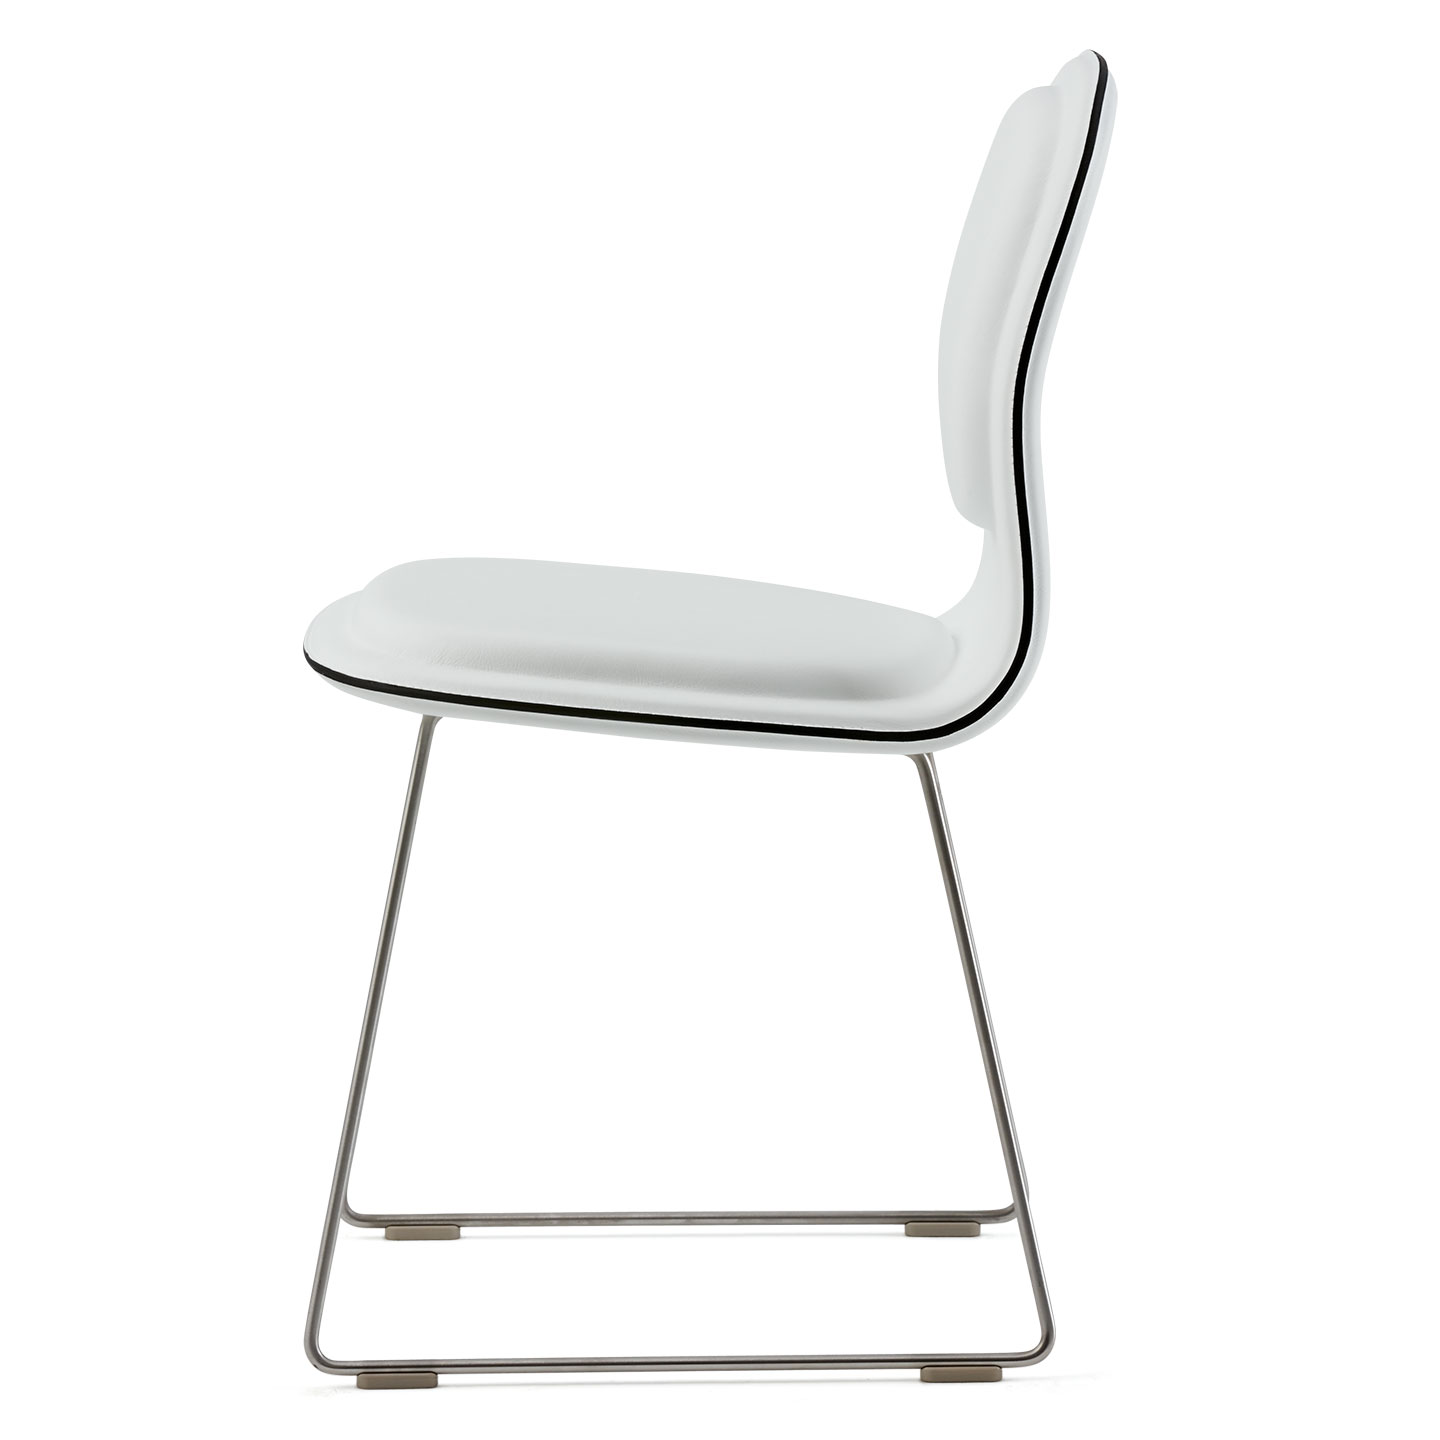 Haworth Hi Pad chair in white upholstery with metal legs